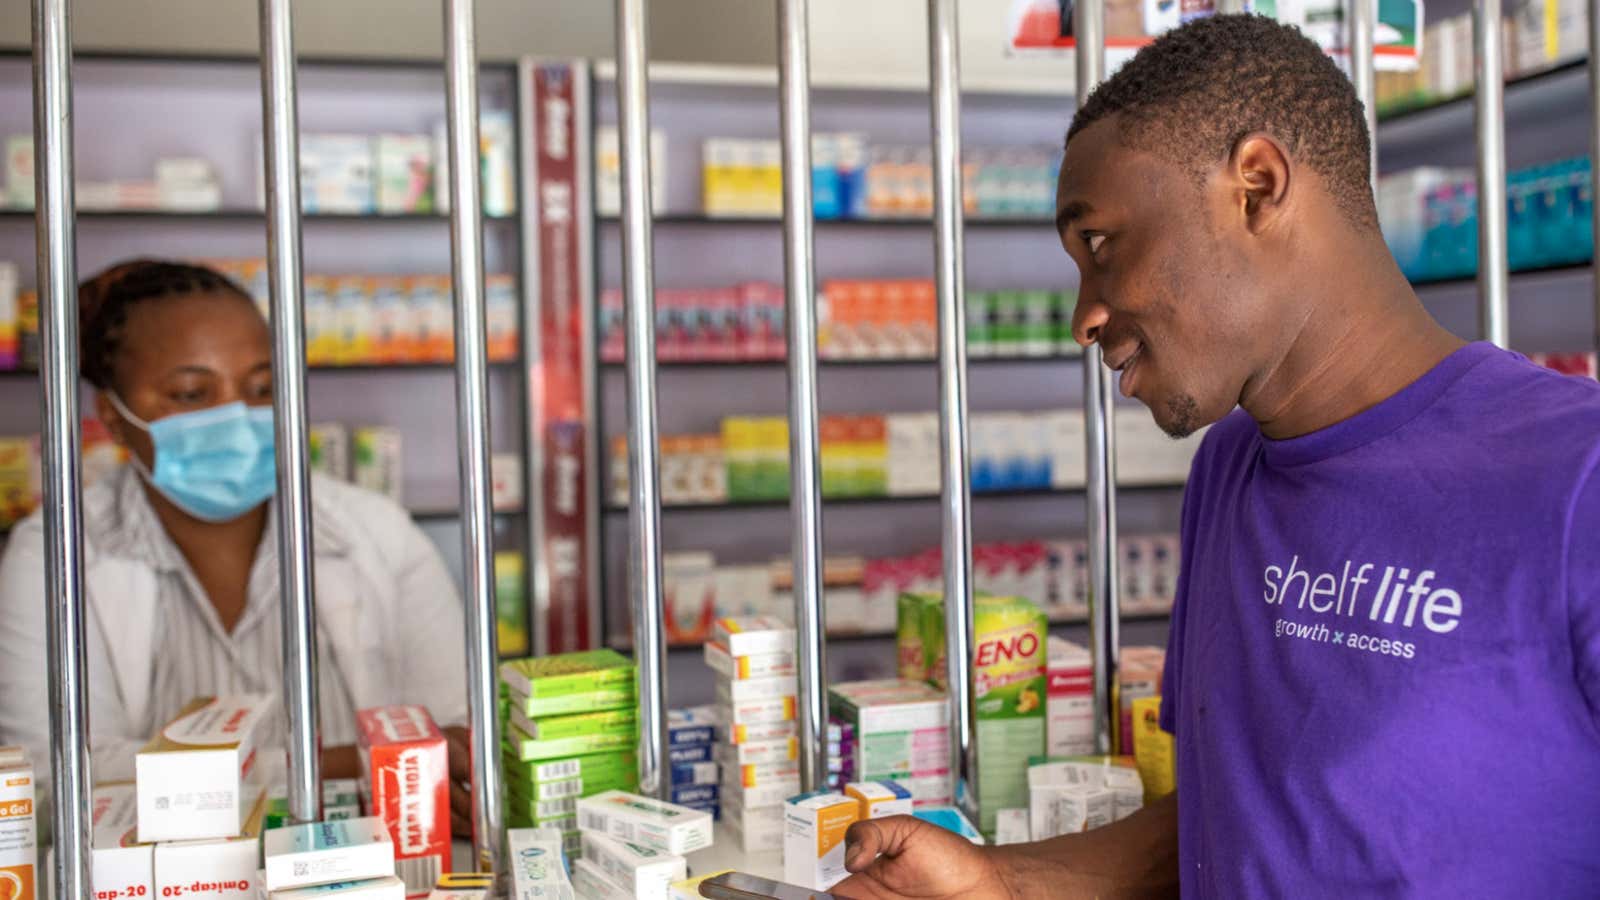 Shelf Life manages forecasting, quality assurance, fulfillment, and inventory management for pharmacies in Kenya and Nigeria through a subscription service.